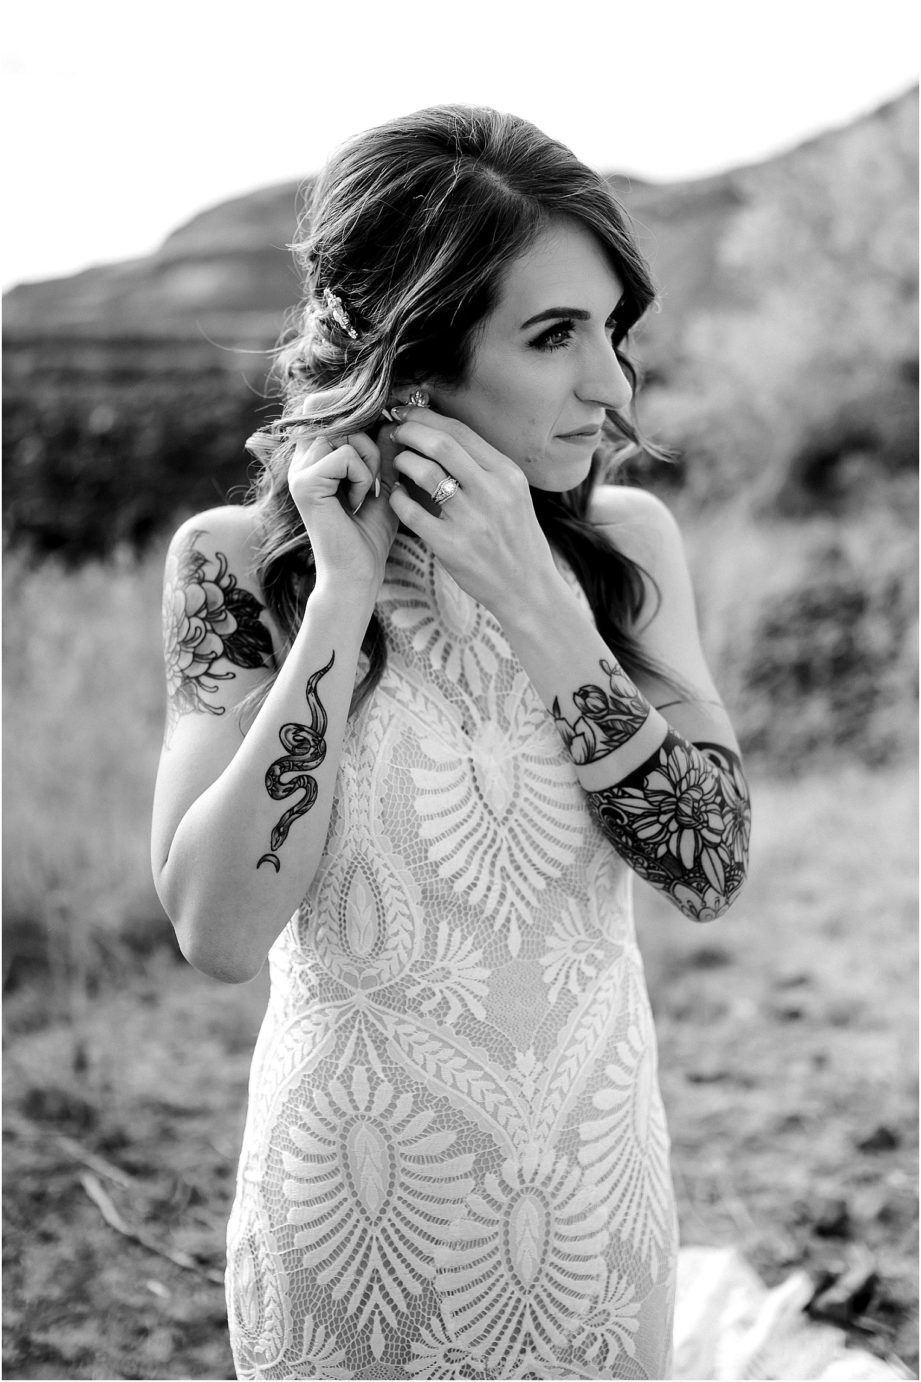 Eastern Washington Elopement Photographer Mike and Carley boho bride putting on earrings